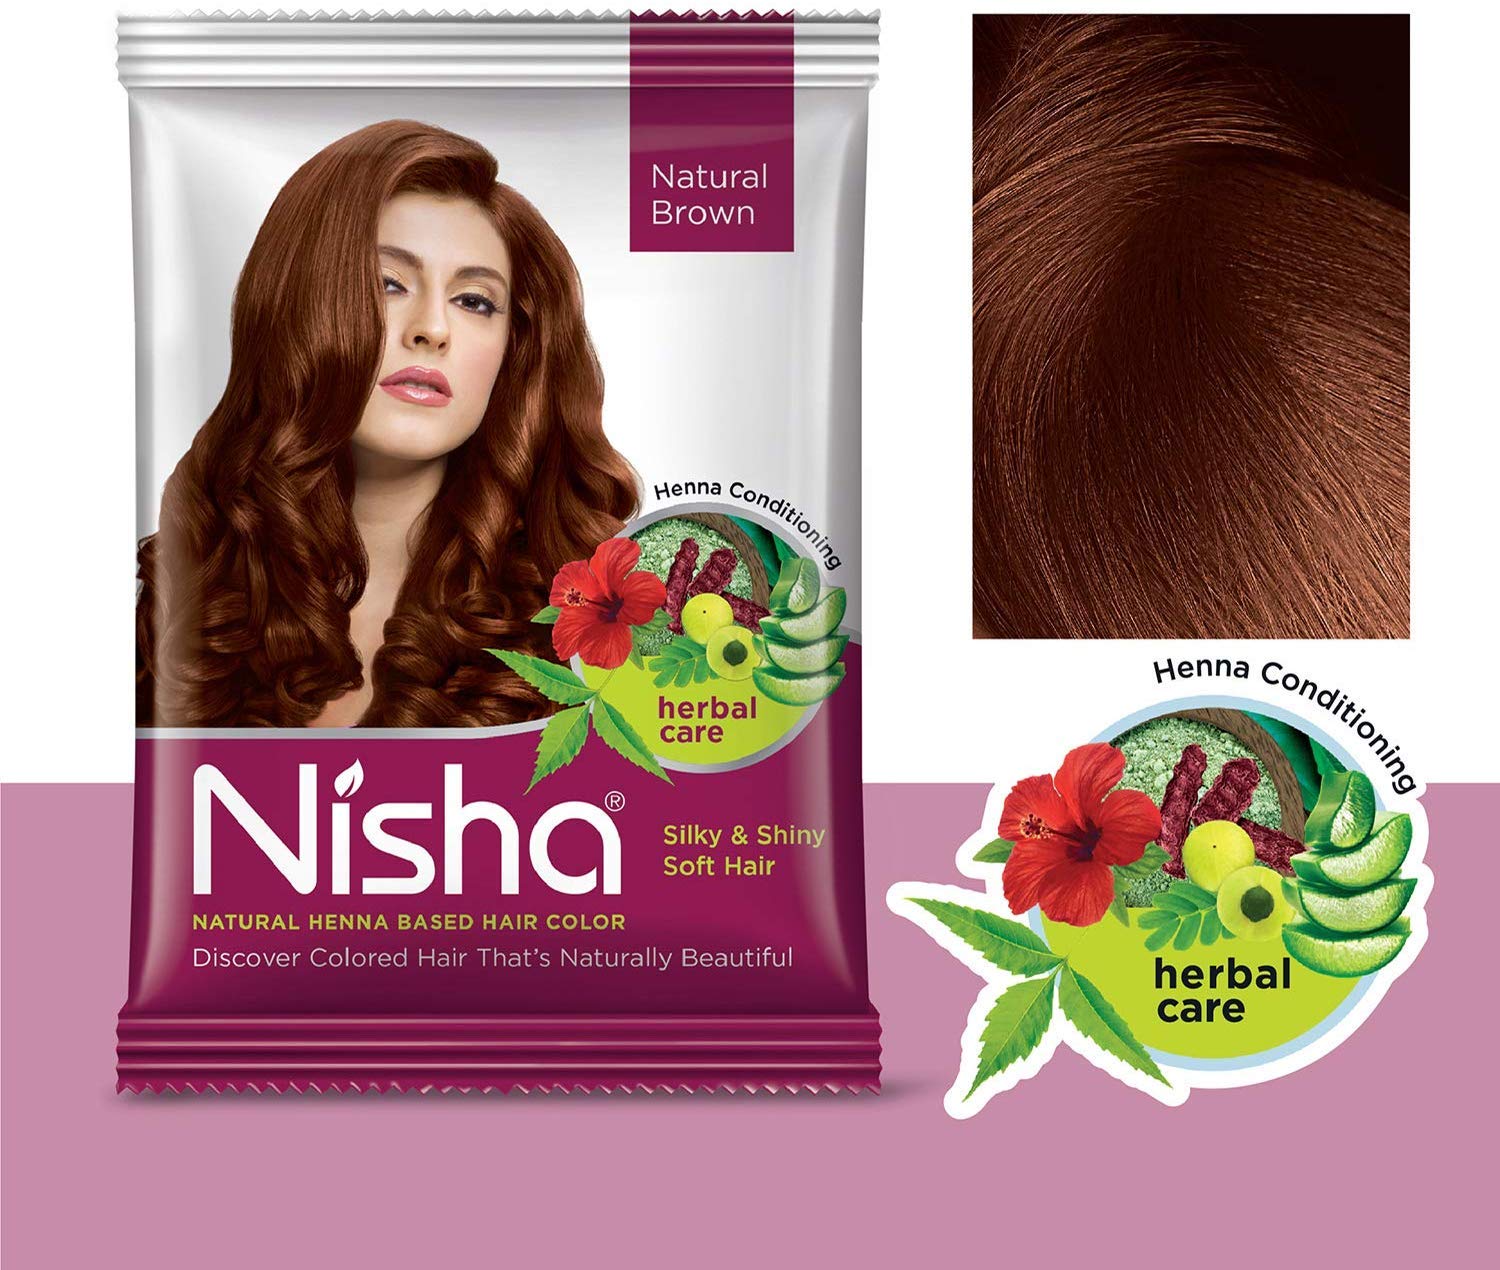 Nisha Henna Based Natural Hair Color - Brown | The Wax Pot - Waxpots for  Sale in South Africa